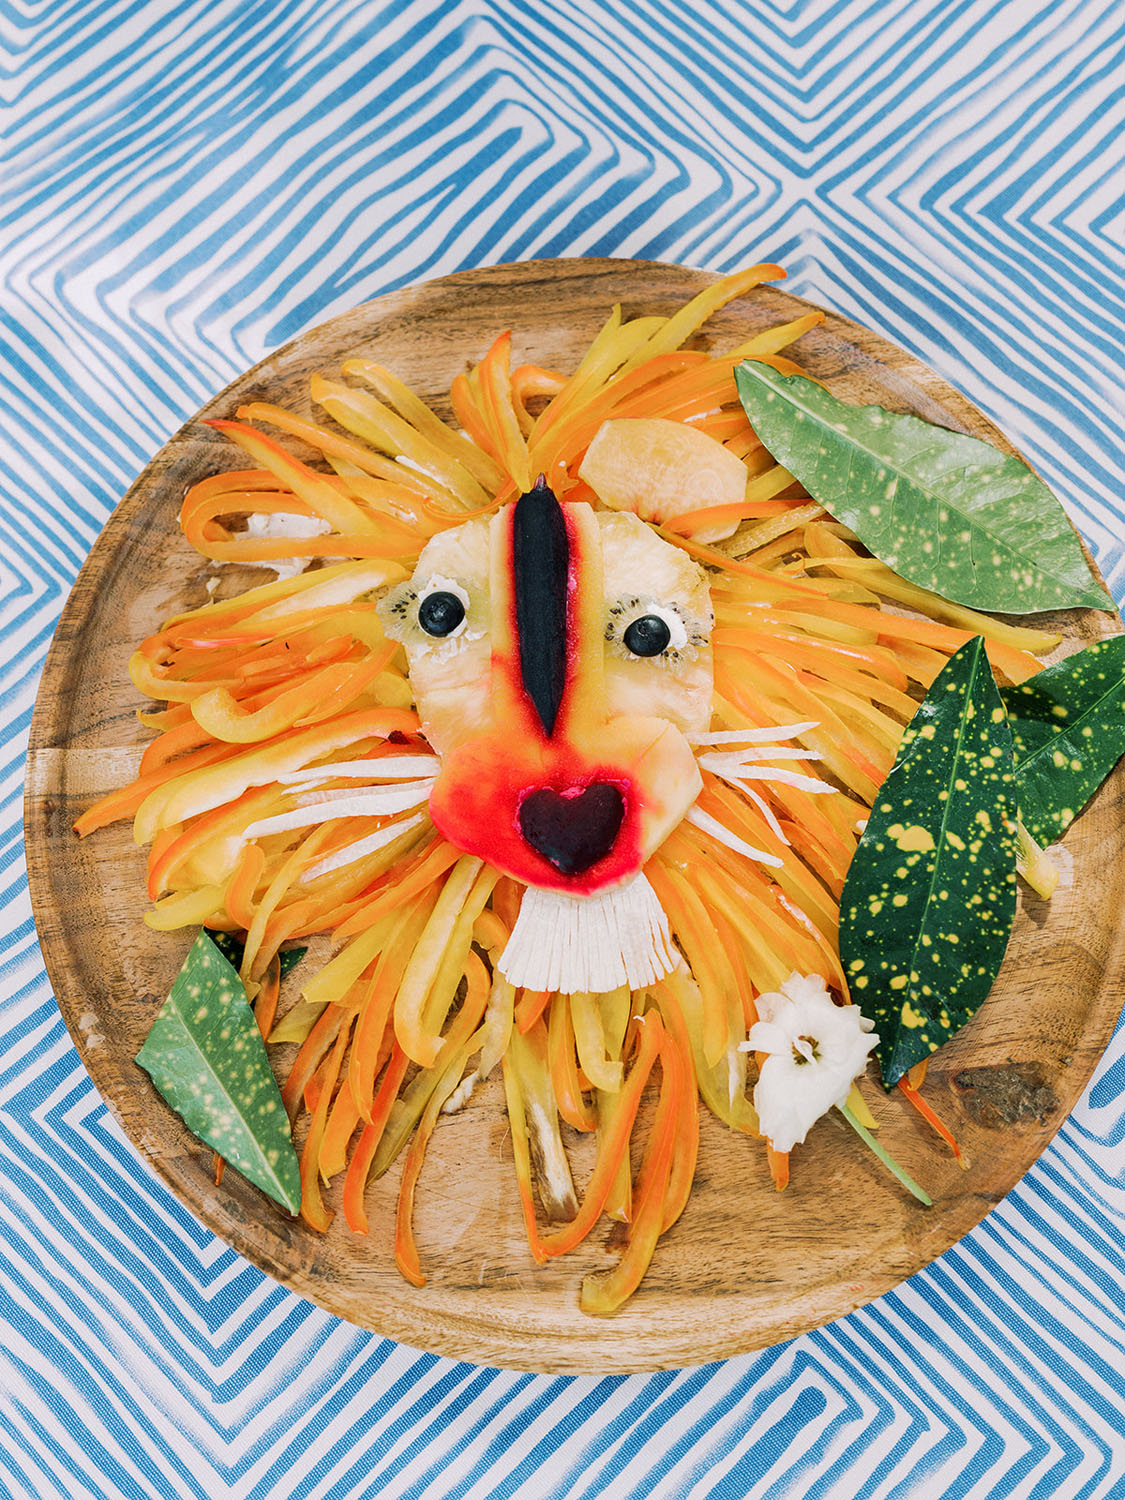 lion shaped food for animal themed party